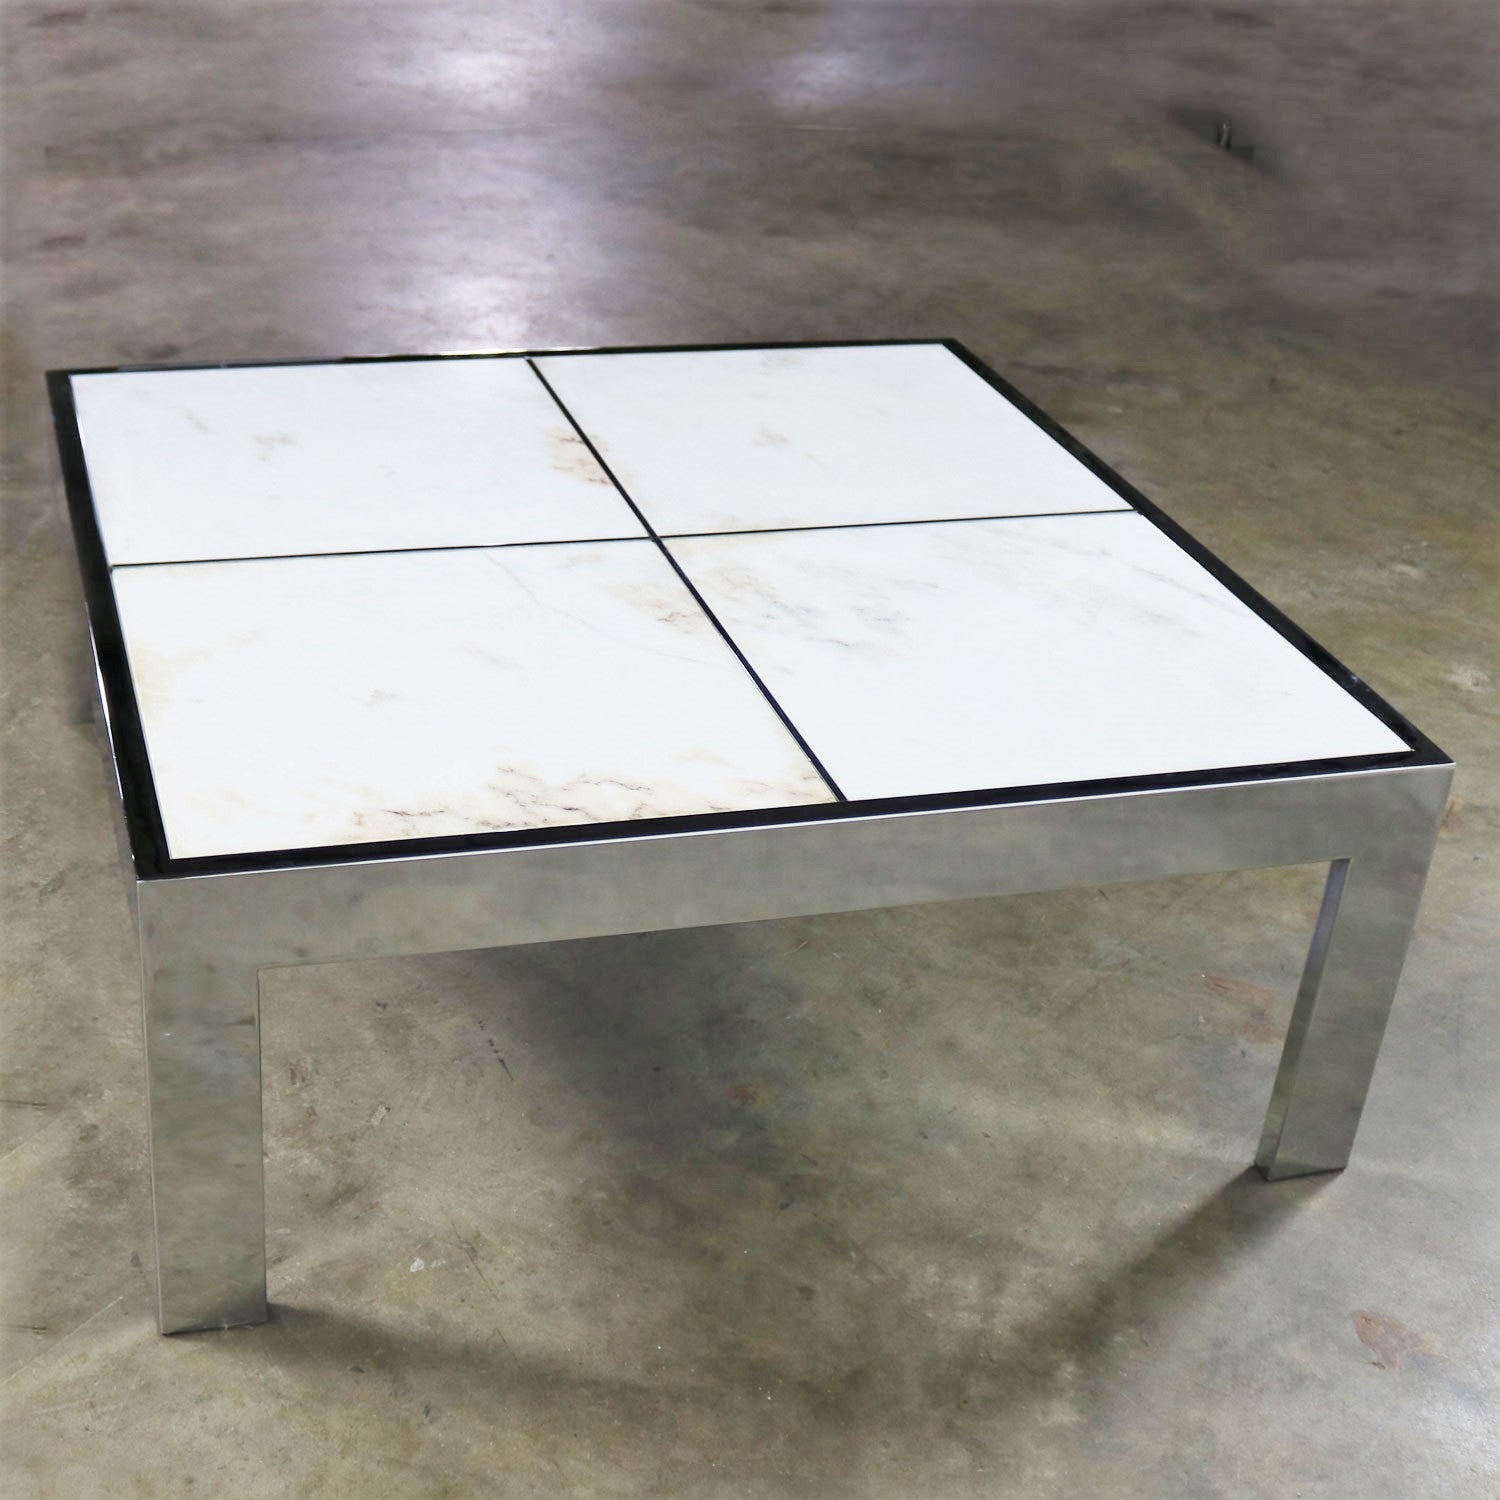 Gorgeous modern chrome and white marble coffee or cocktail table which is attributed to The Pace Collection with Leon Rosen as the designer. This table is not marked but all sizes and materials point to this attribution. It is in wonderful vintage